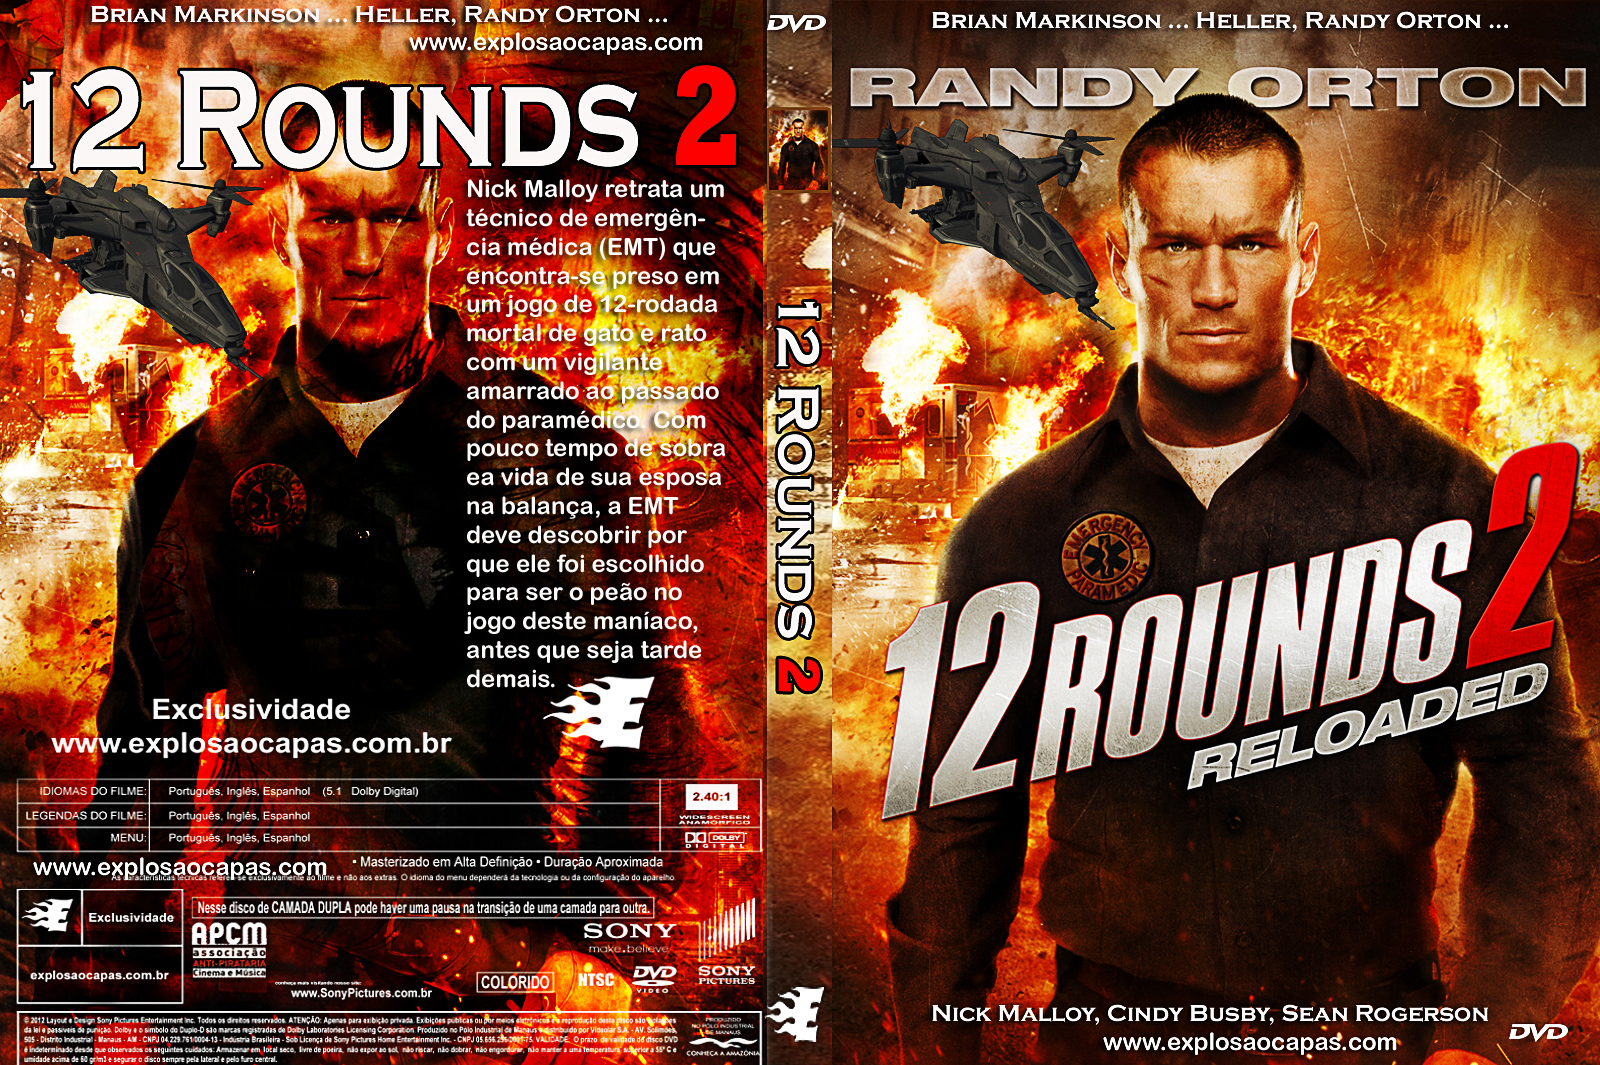 Rounds download. Rounds игра. 12 Раундов Постер. 12 Раундов 2 (2013) Постер. 12 Раундов (DVD).